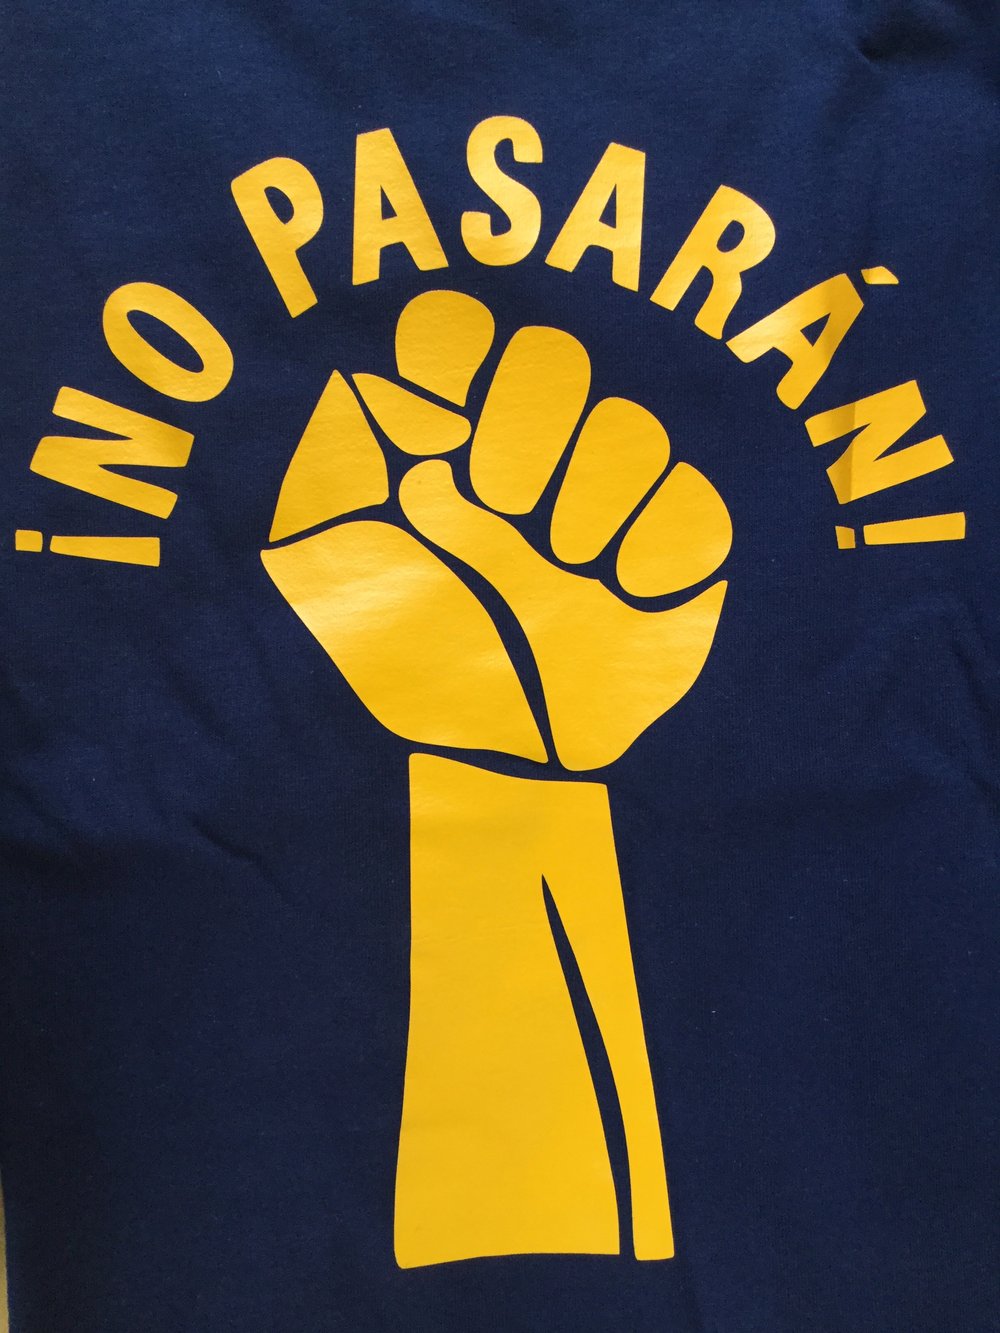 No Pasarán! t-shirt in Navy and Yellow colourways 